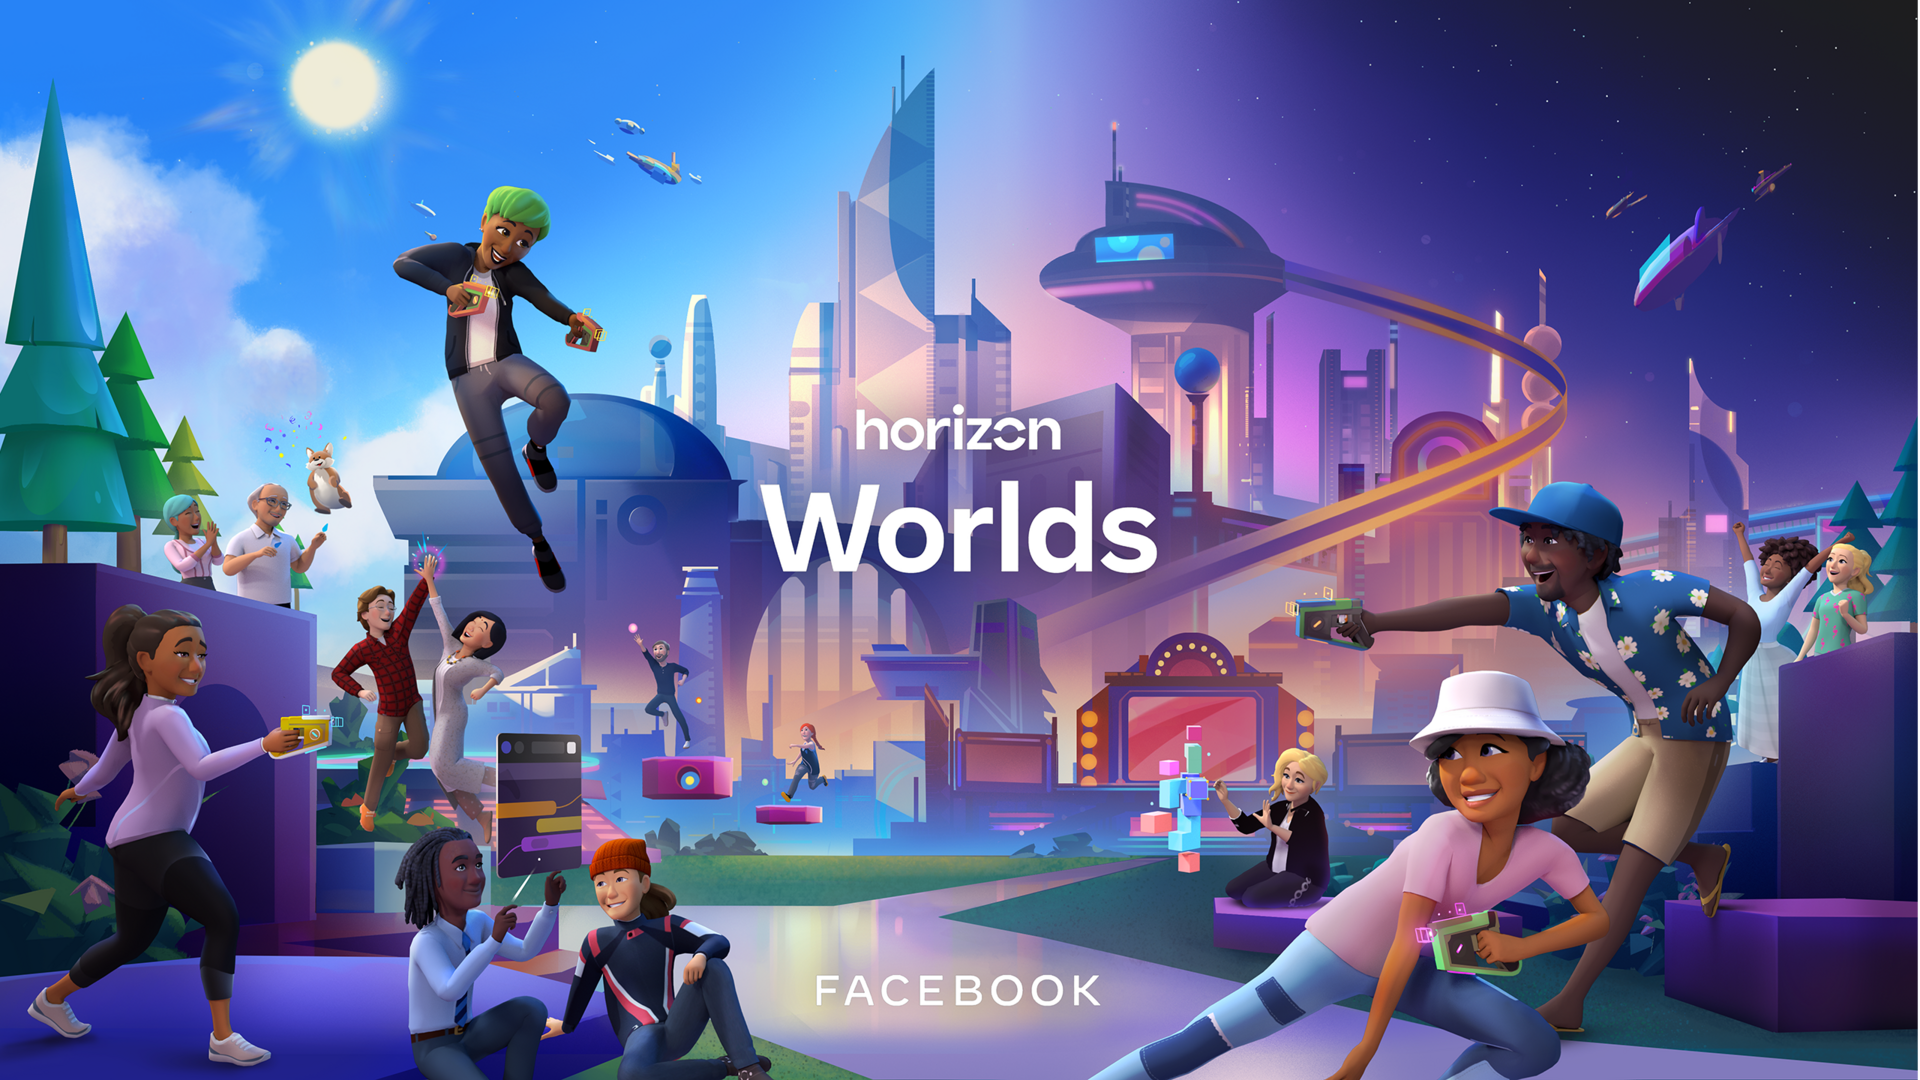 Meta's Horizon Worlds is now accessible on web and mobile